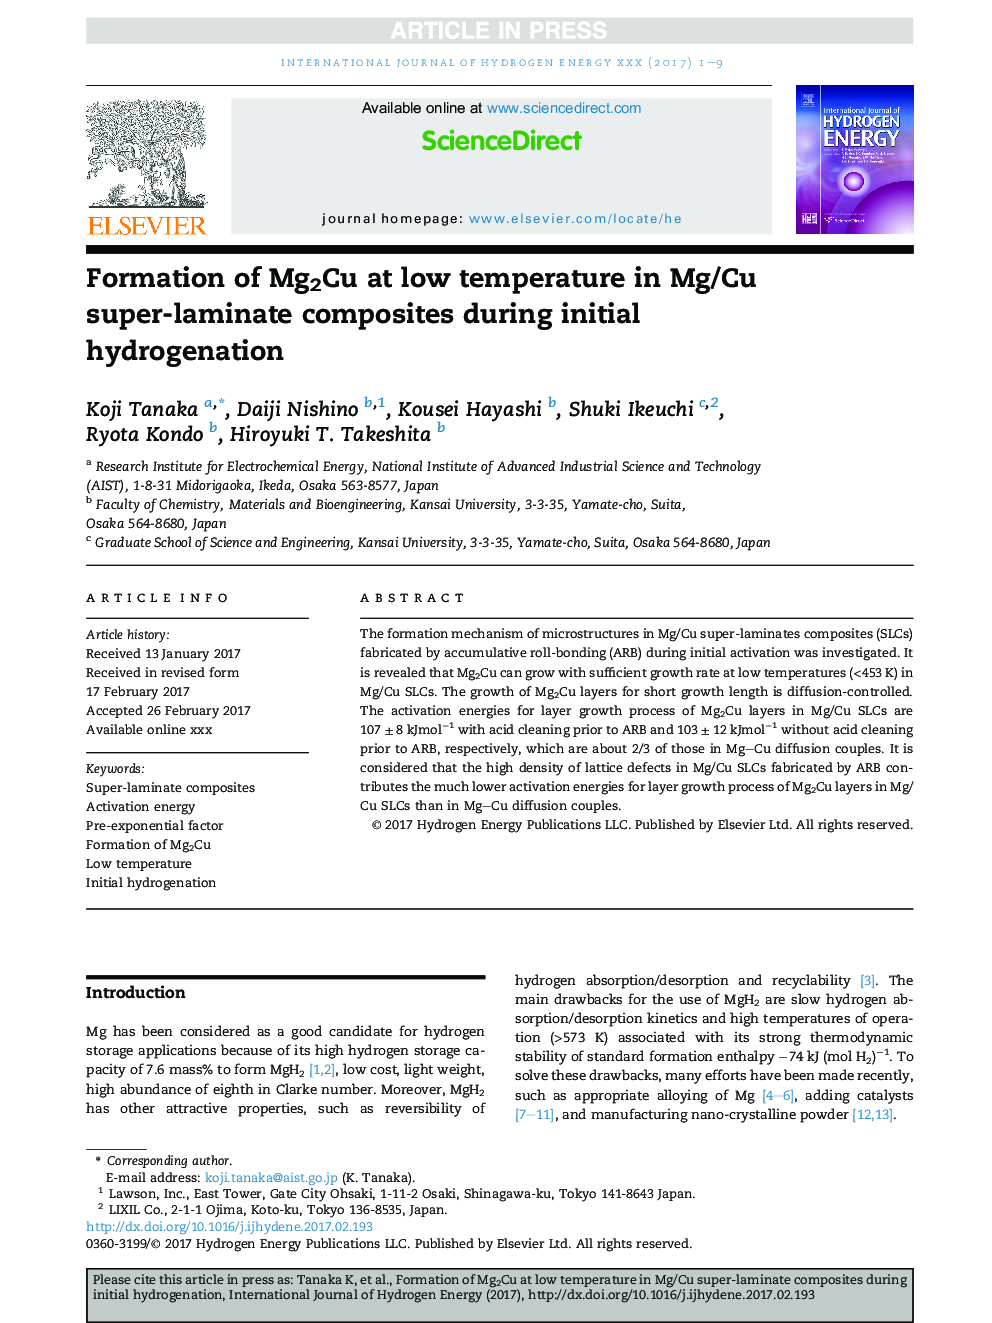 Formation of Mg2Cu at low temperature in Mg/Cu super-laminate composites during initial hydrogenation